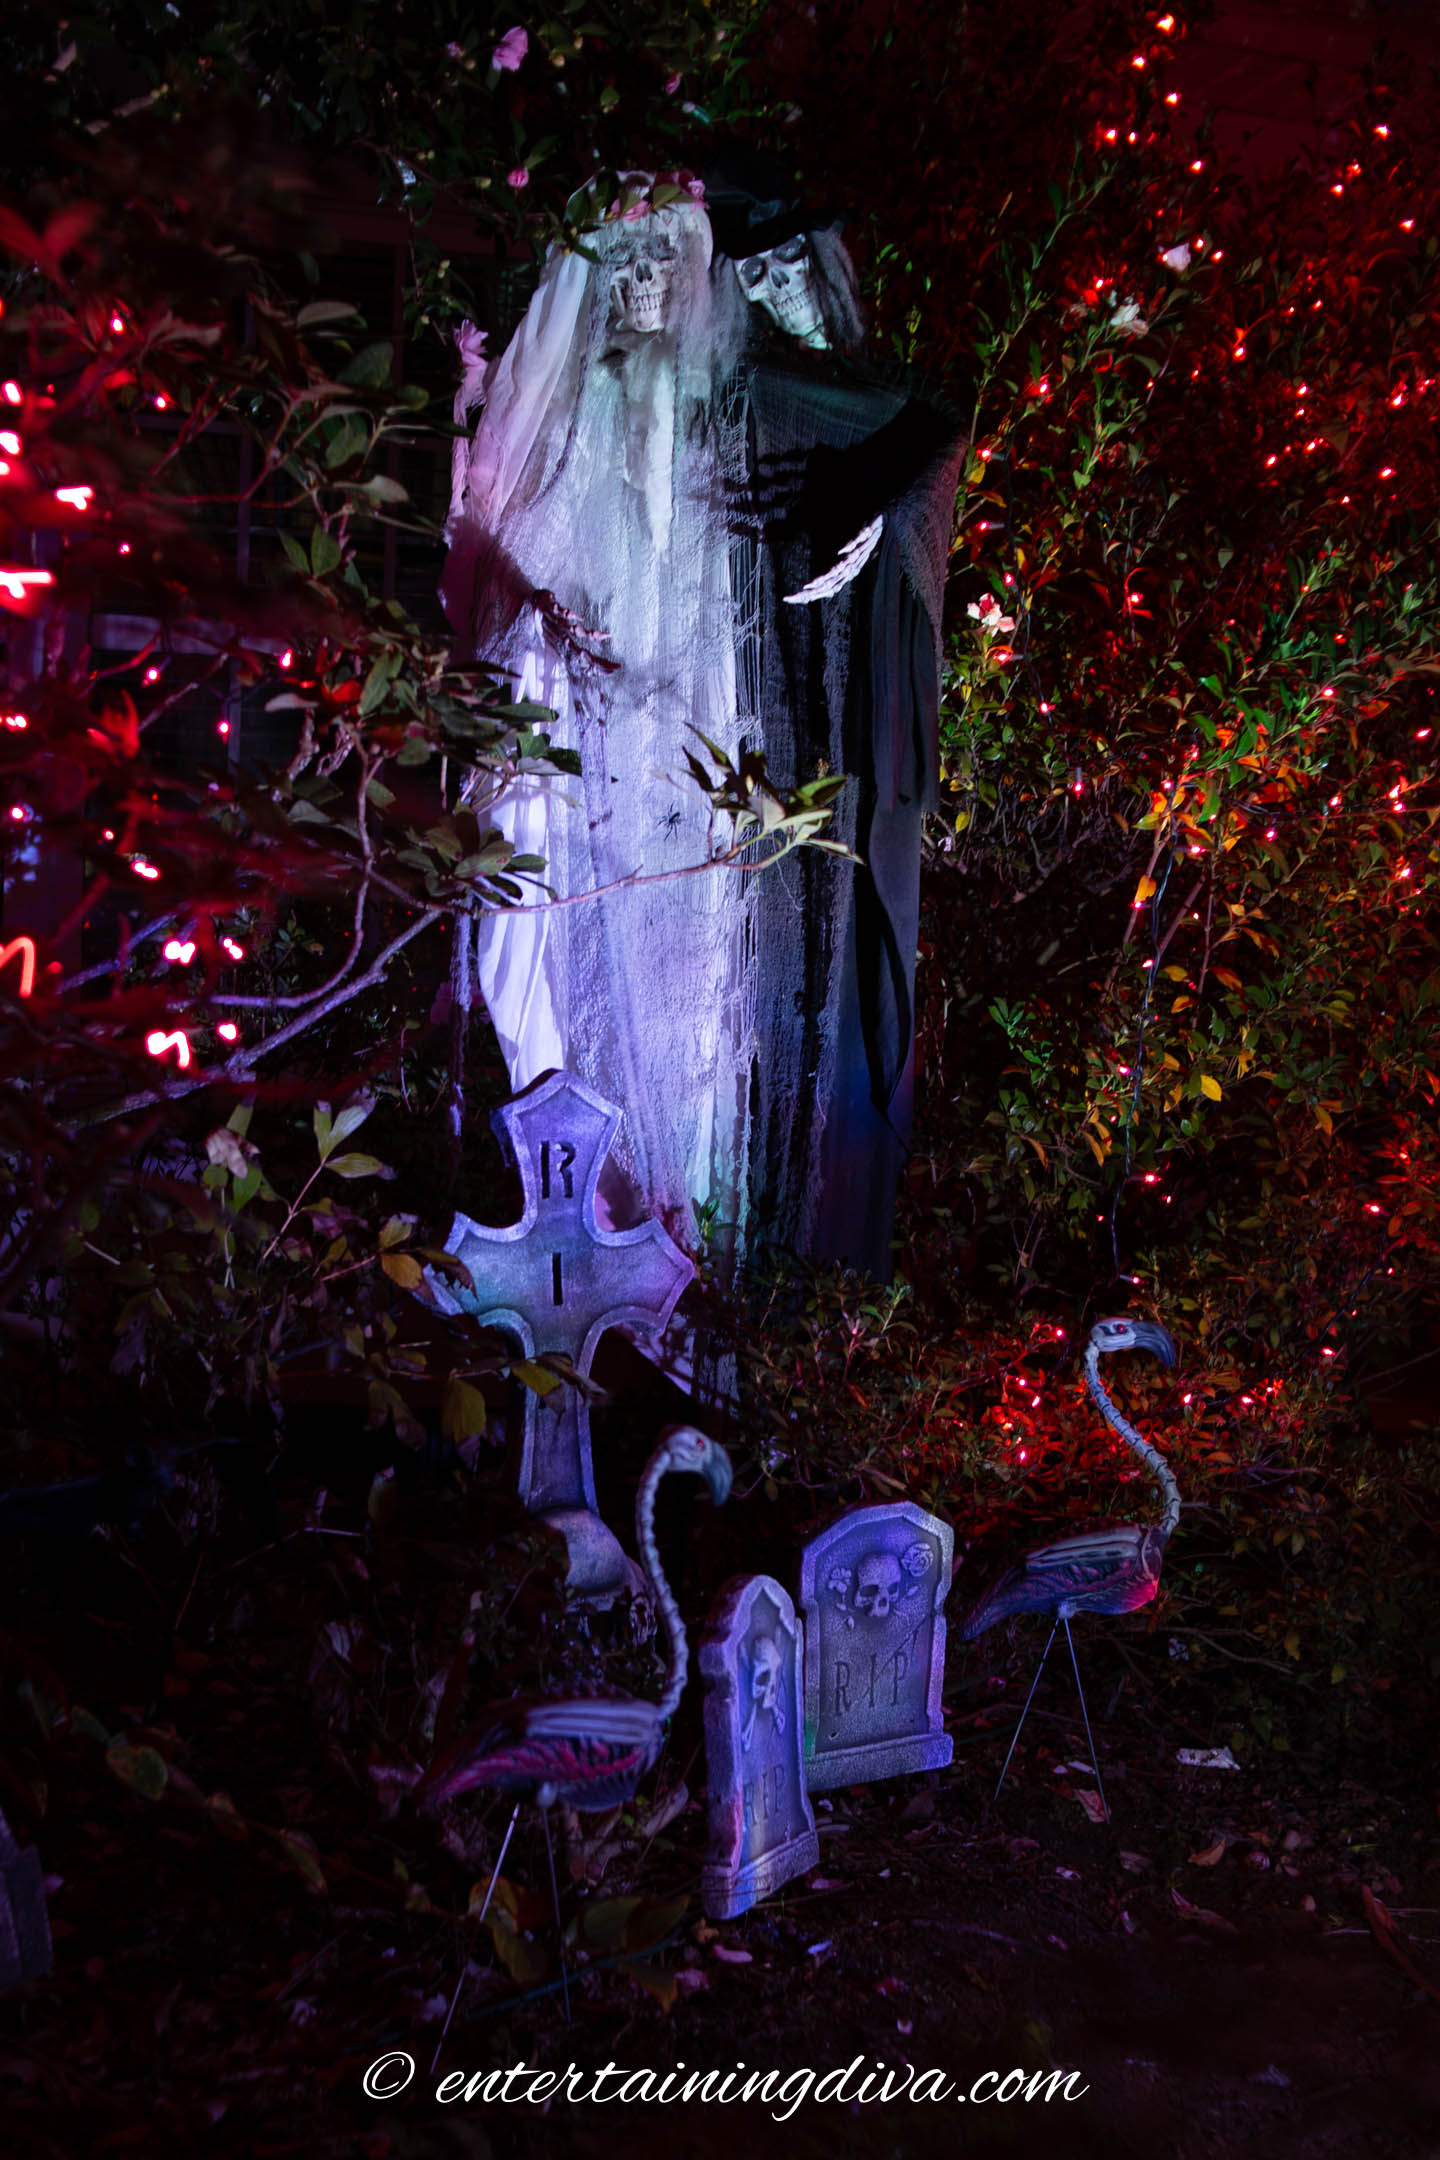 Ghosts, skeleton flamingoes and tombstones lit up at night with Halloween outdoor lighting